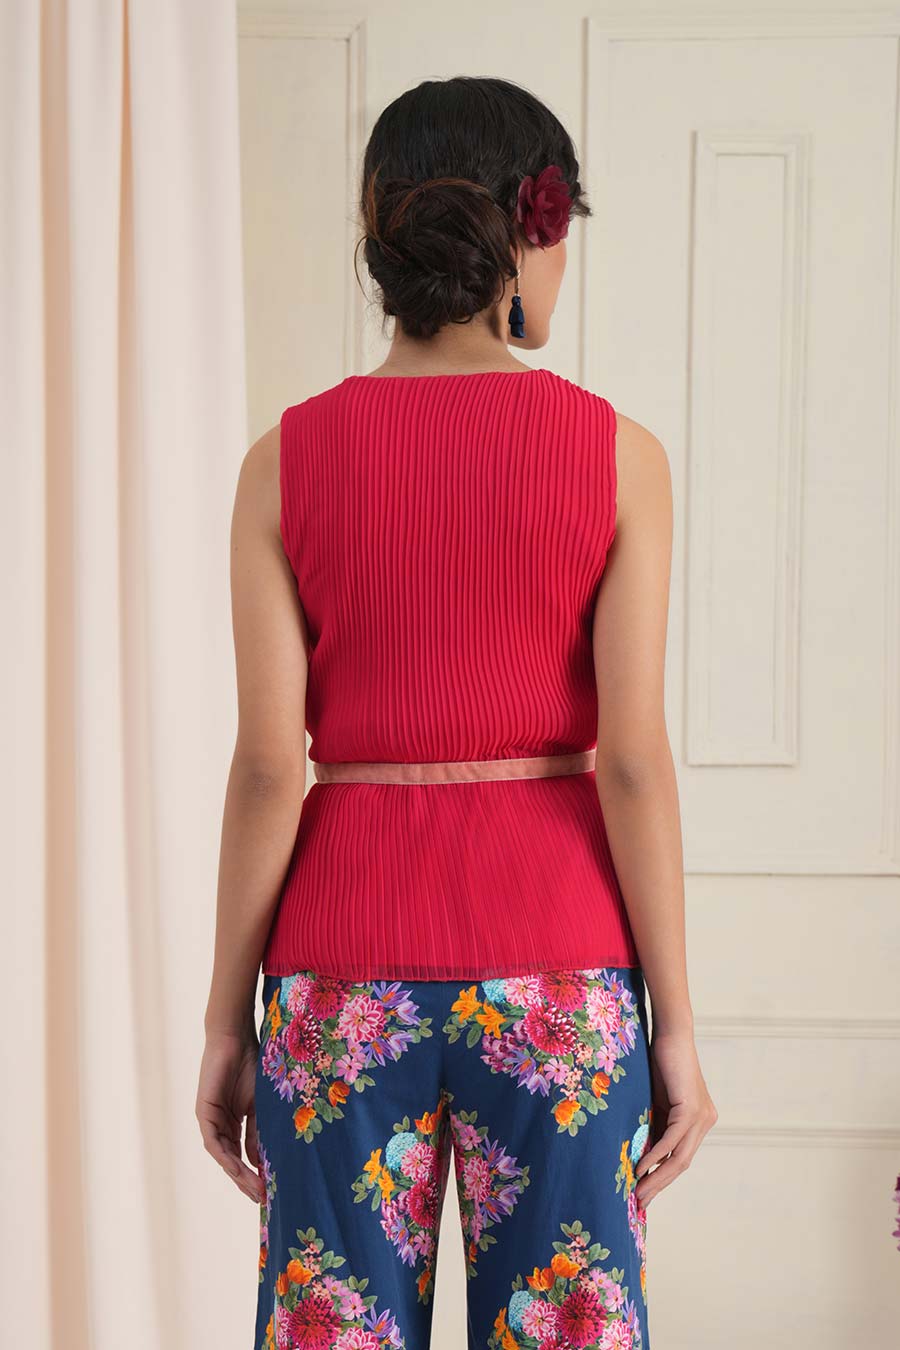 Red Pleated Top